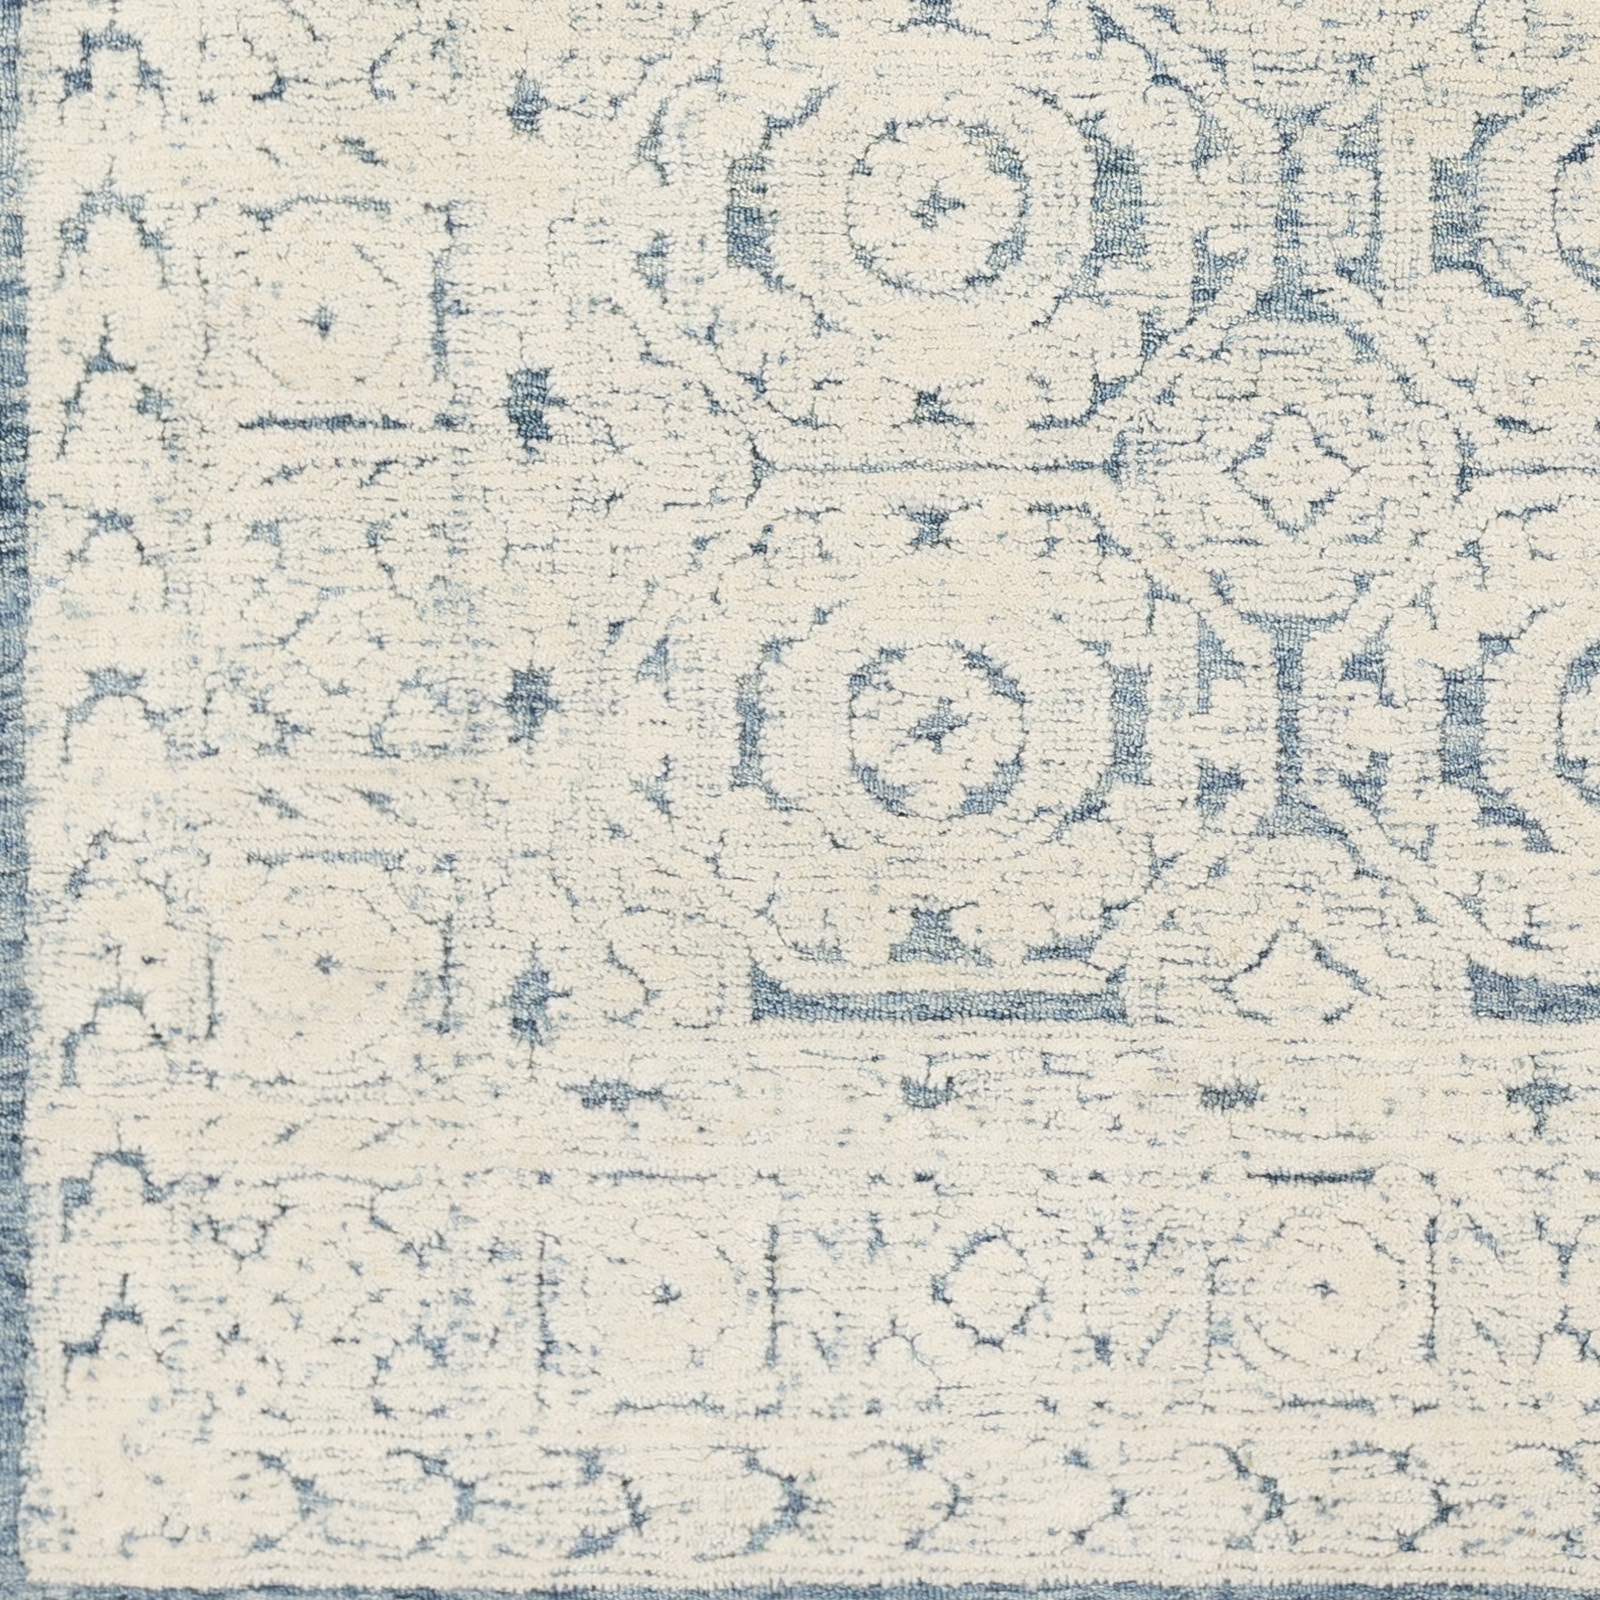 Louvre Rug, 2'6" x 8' - Image 2